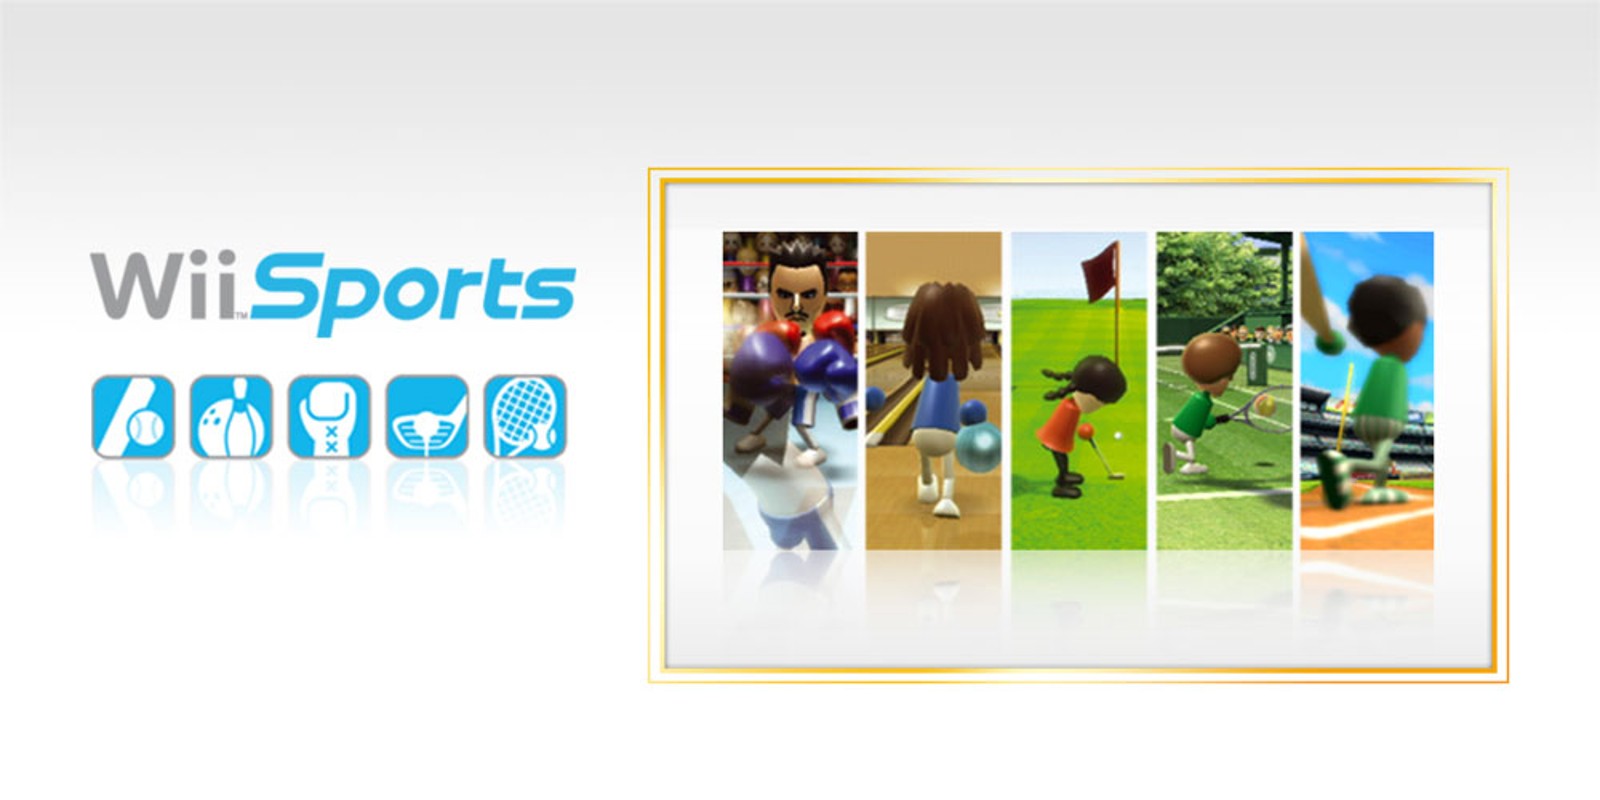 Wii Sports World Video Game Hall of Fame